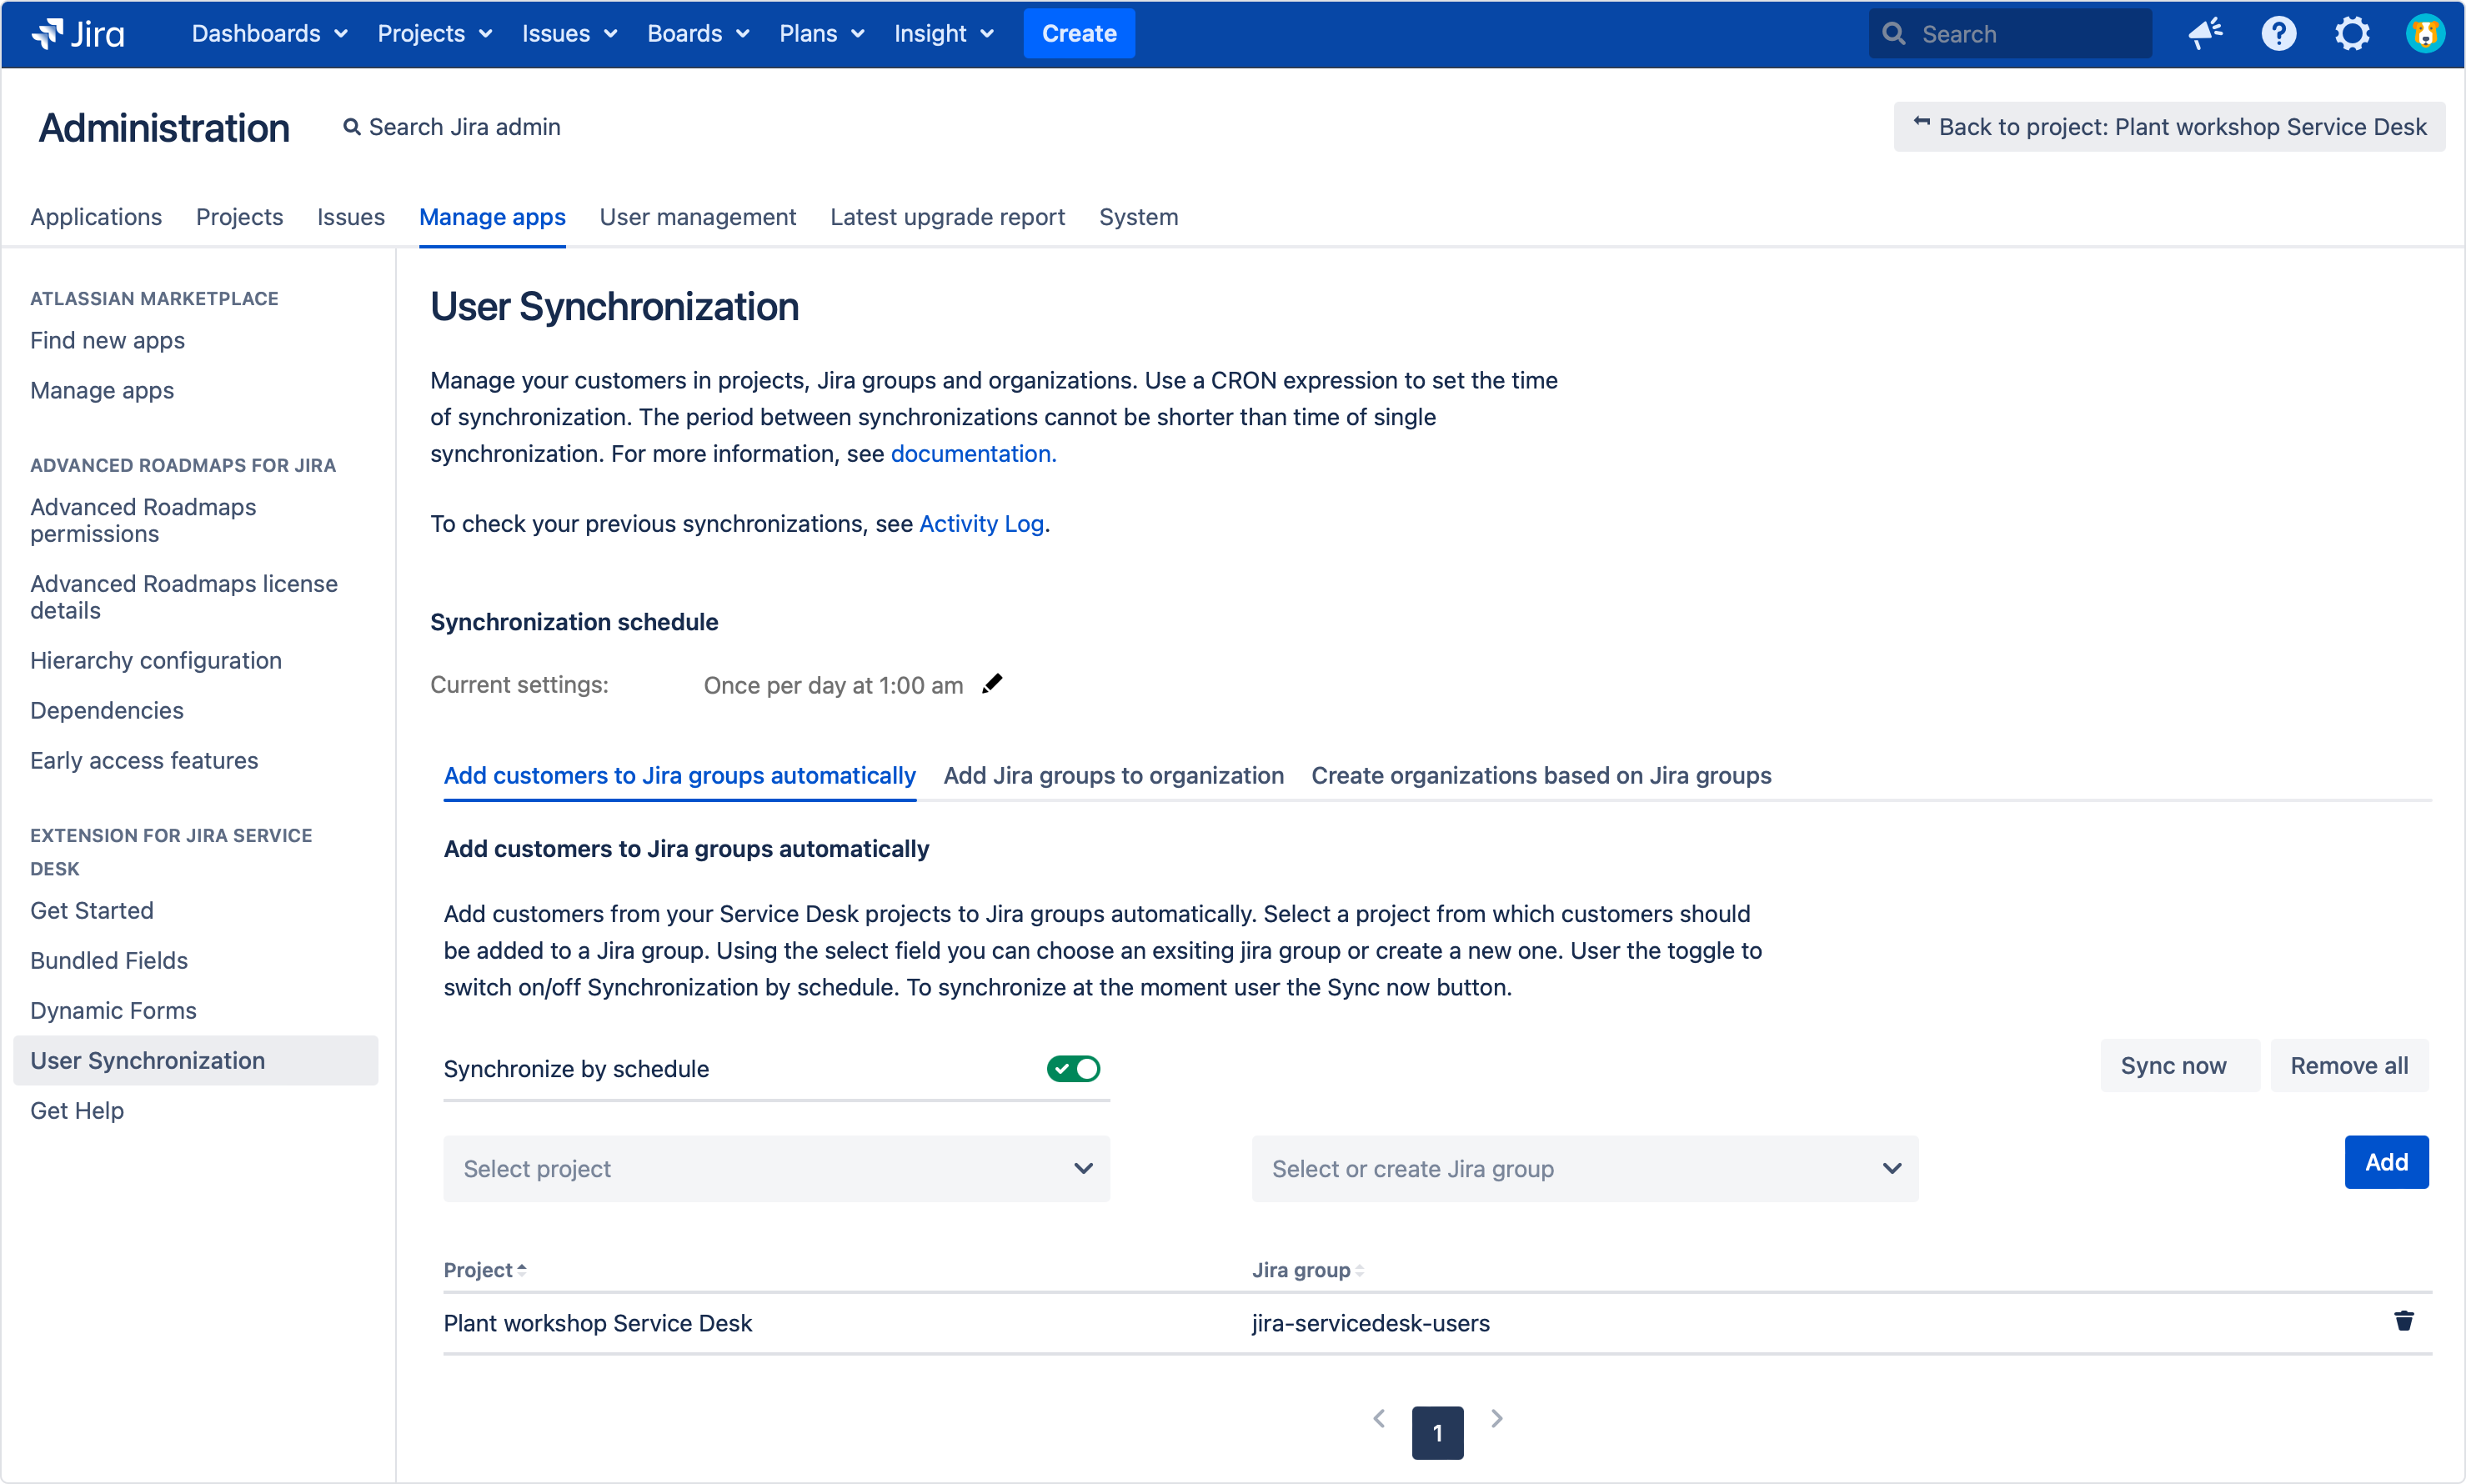 Jira Service Management customers in organizations and groups